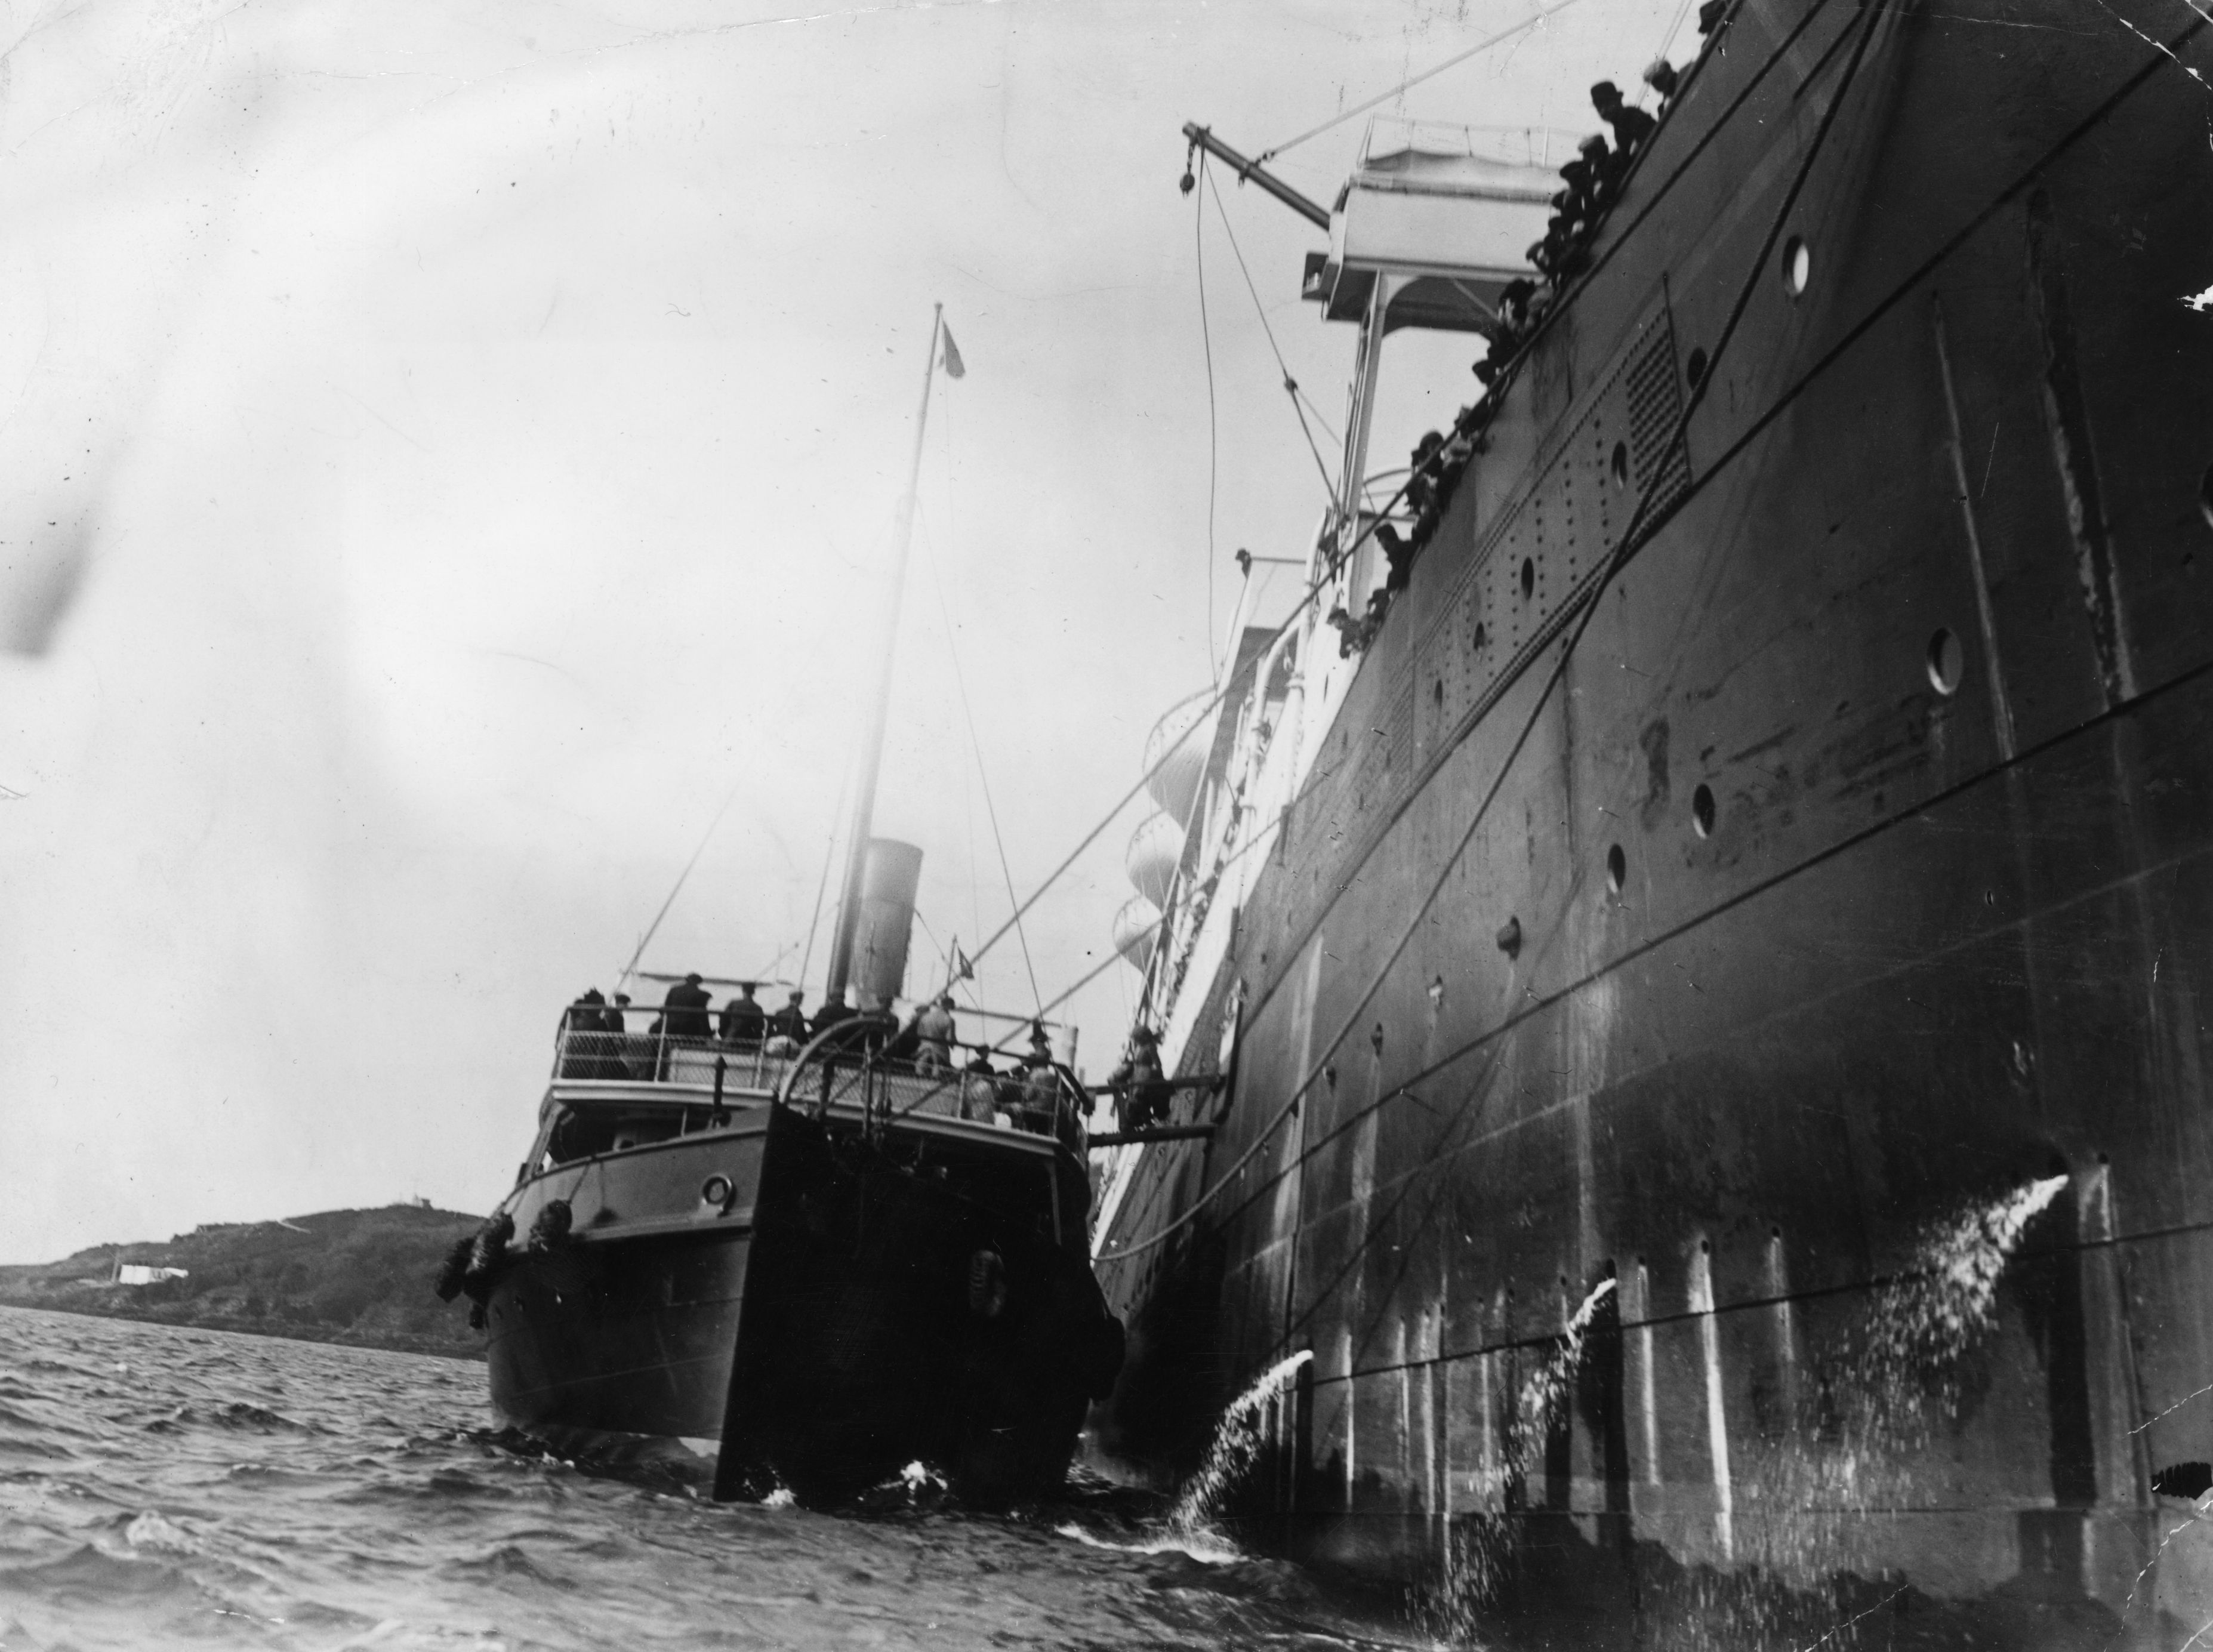 These old Titanic photos show just how much has changed since April 1912